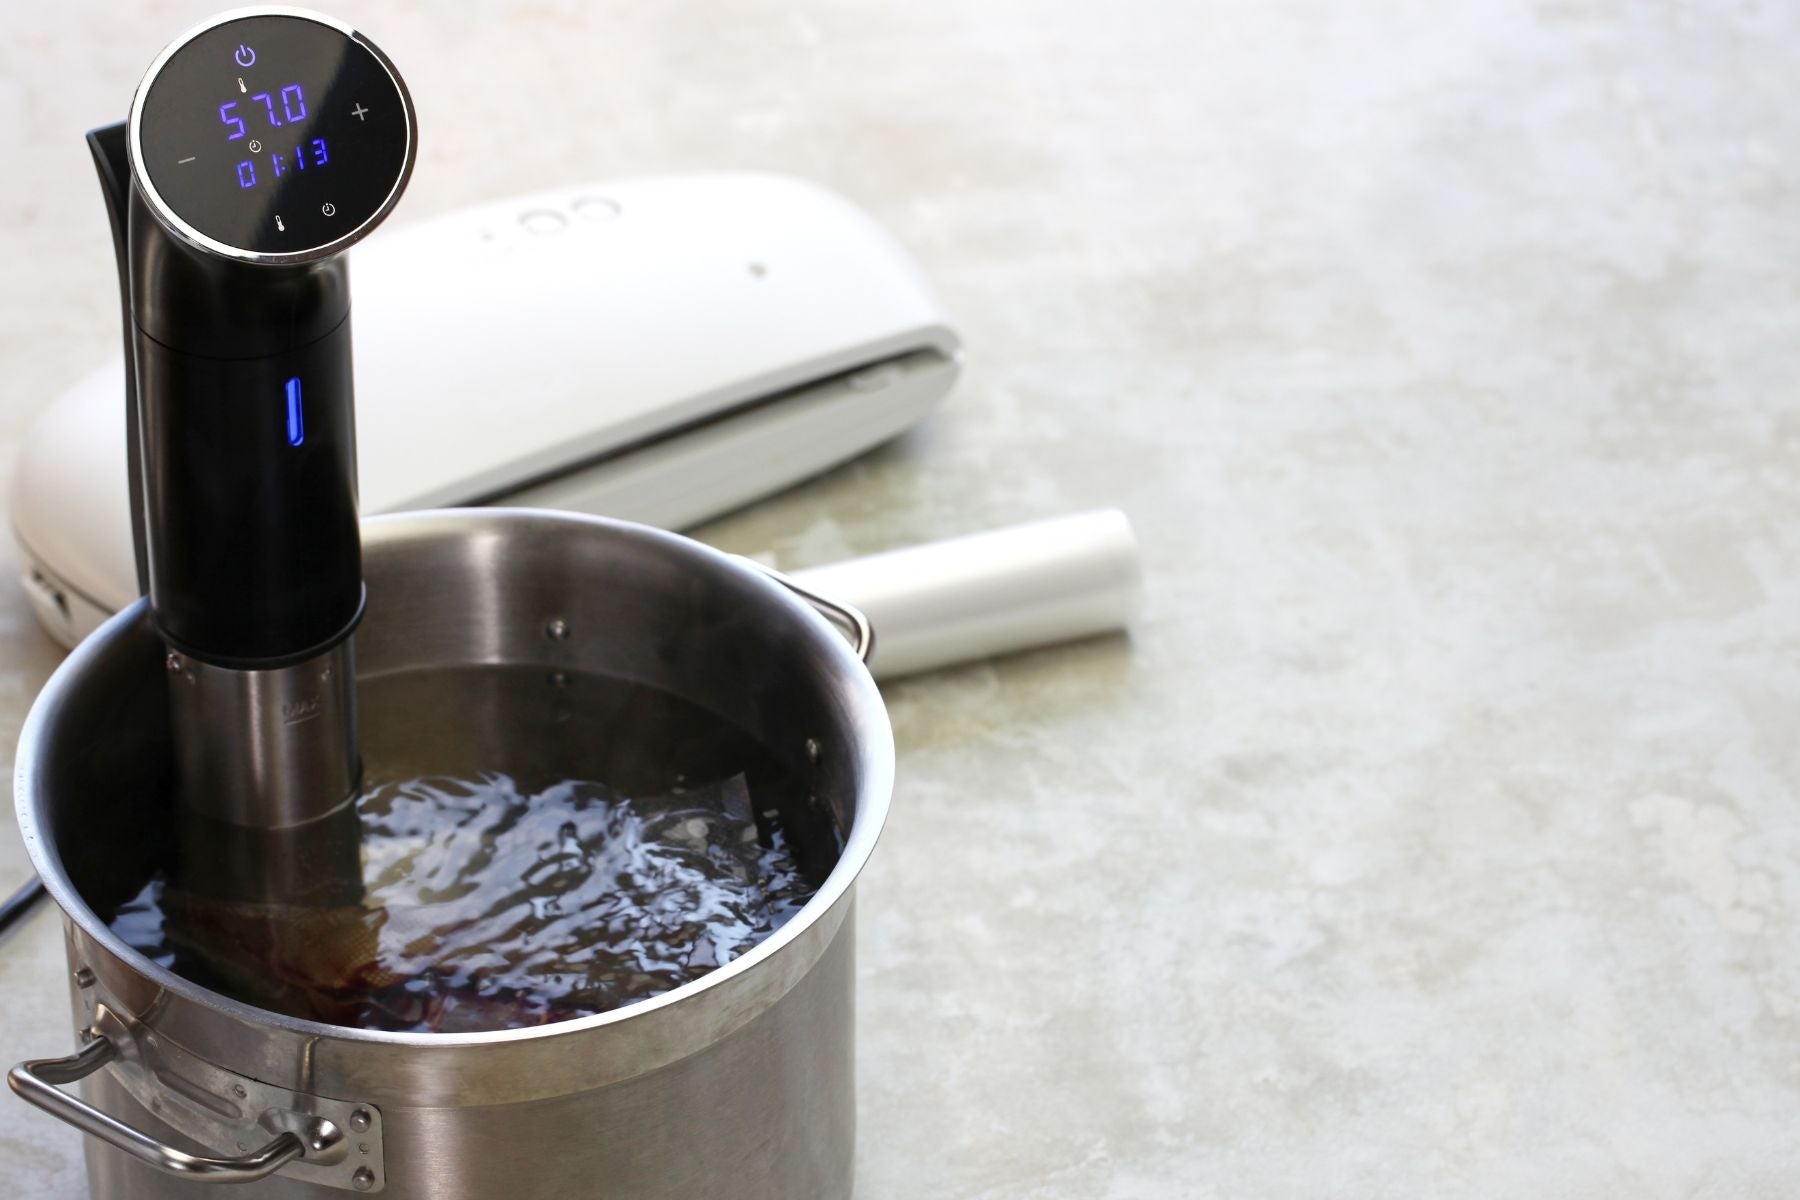 Sous Vide: What is it? What are the benefits?